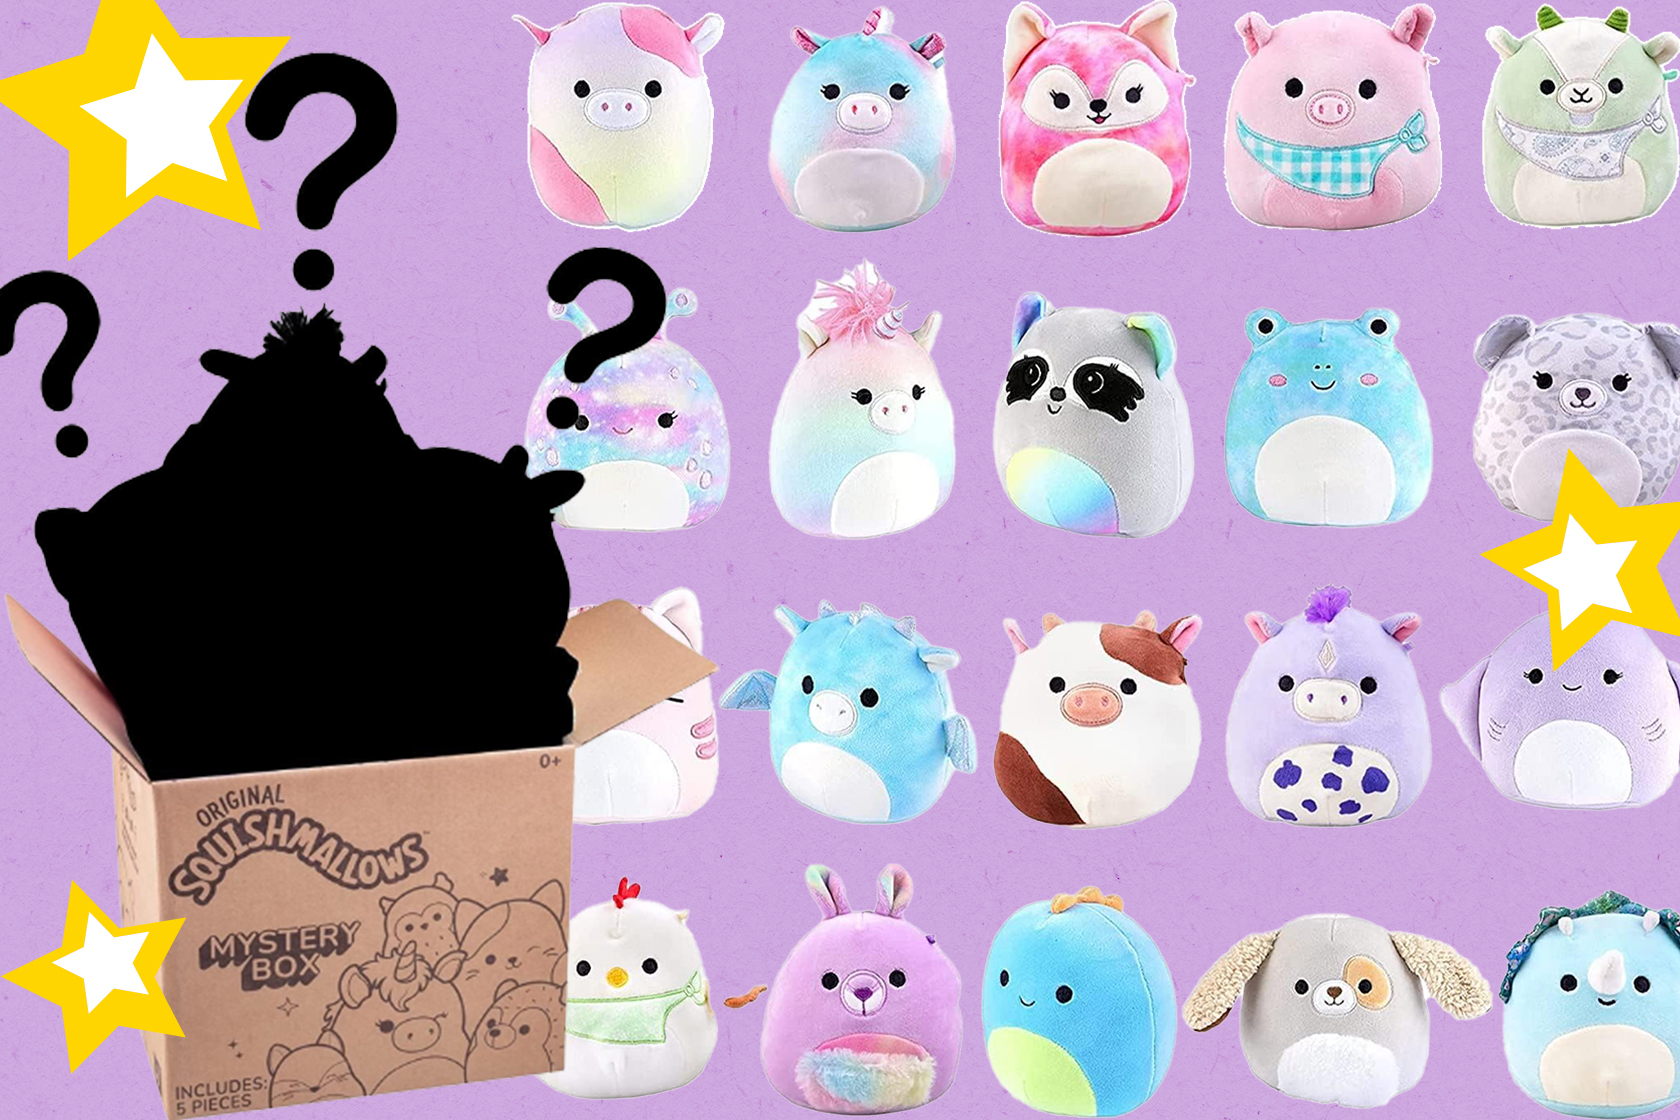 Surprise! Get this mystery Squishmallow box for 40% off at